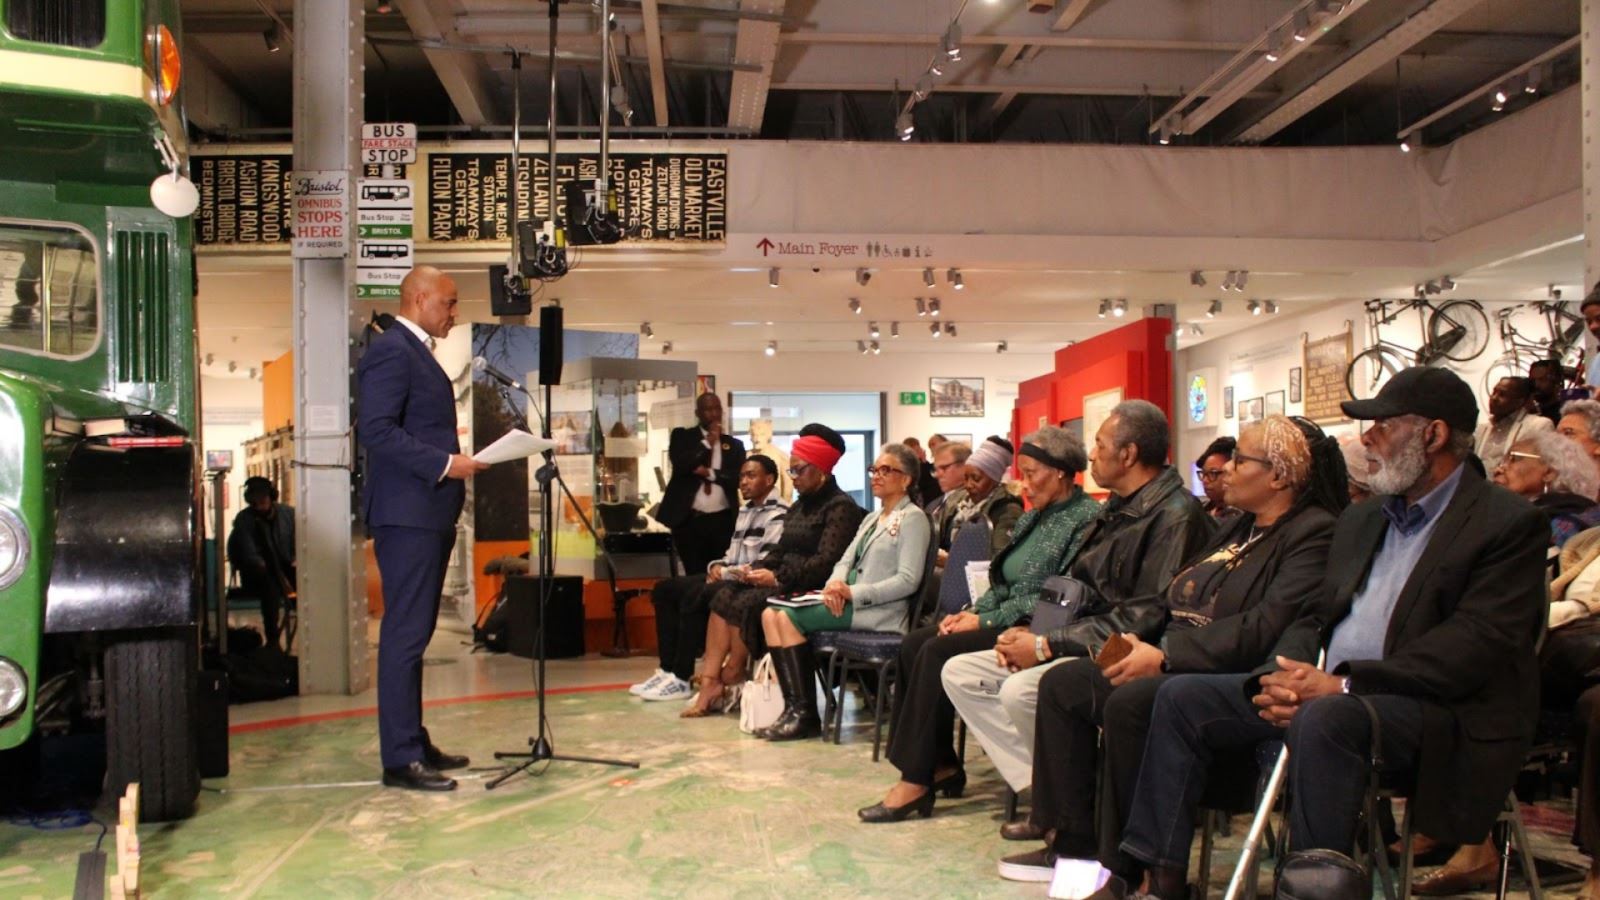 Community representatives from across Bristol met at M Shed on Friday (28 April) to mark the 60th anniversary of the beginning of the Bristol Bus Boycott. The event included a speech by Mayor Marvin Rees.